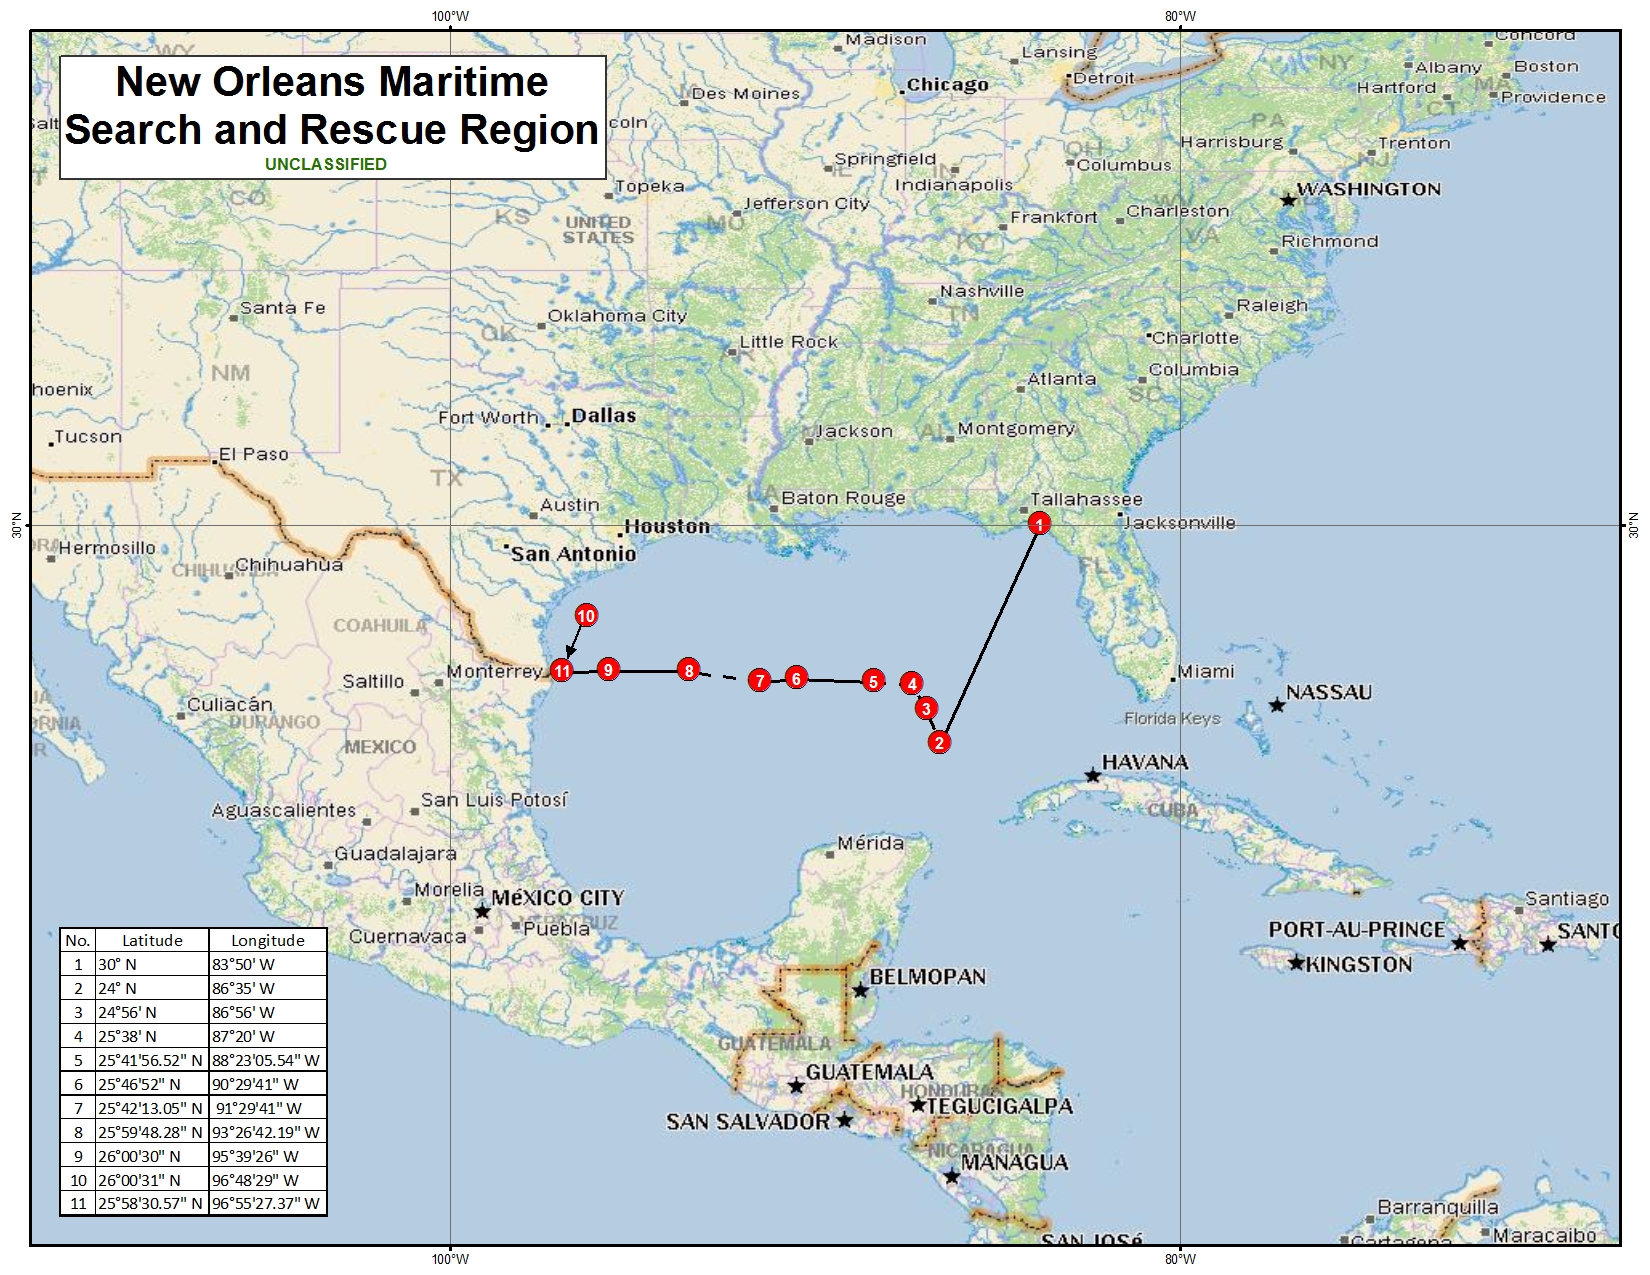 New Orleans Maritime Search and Rescue Region